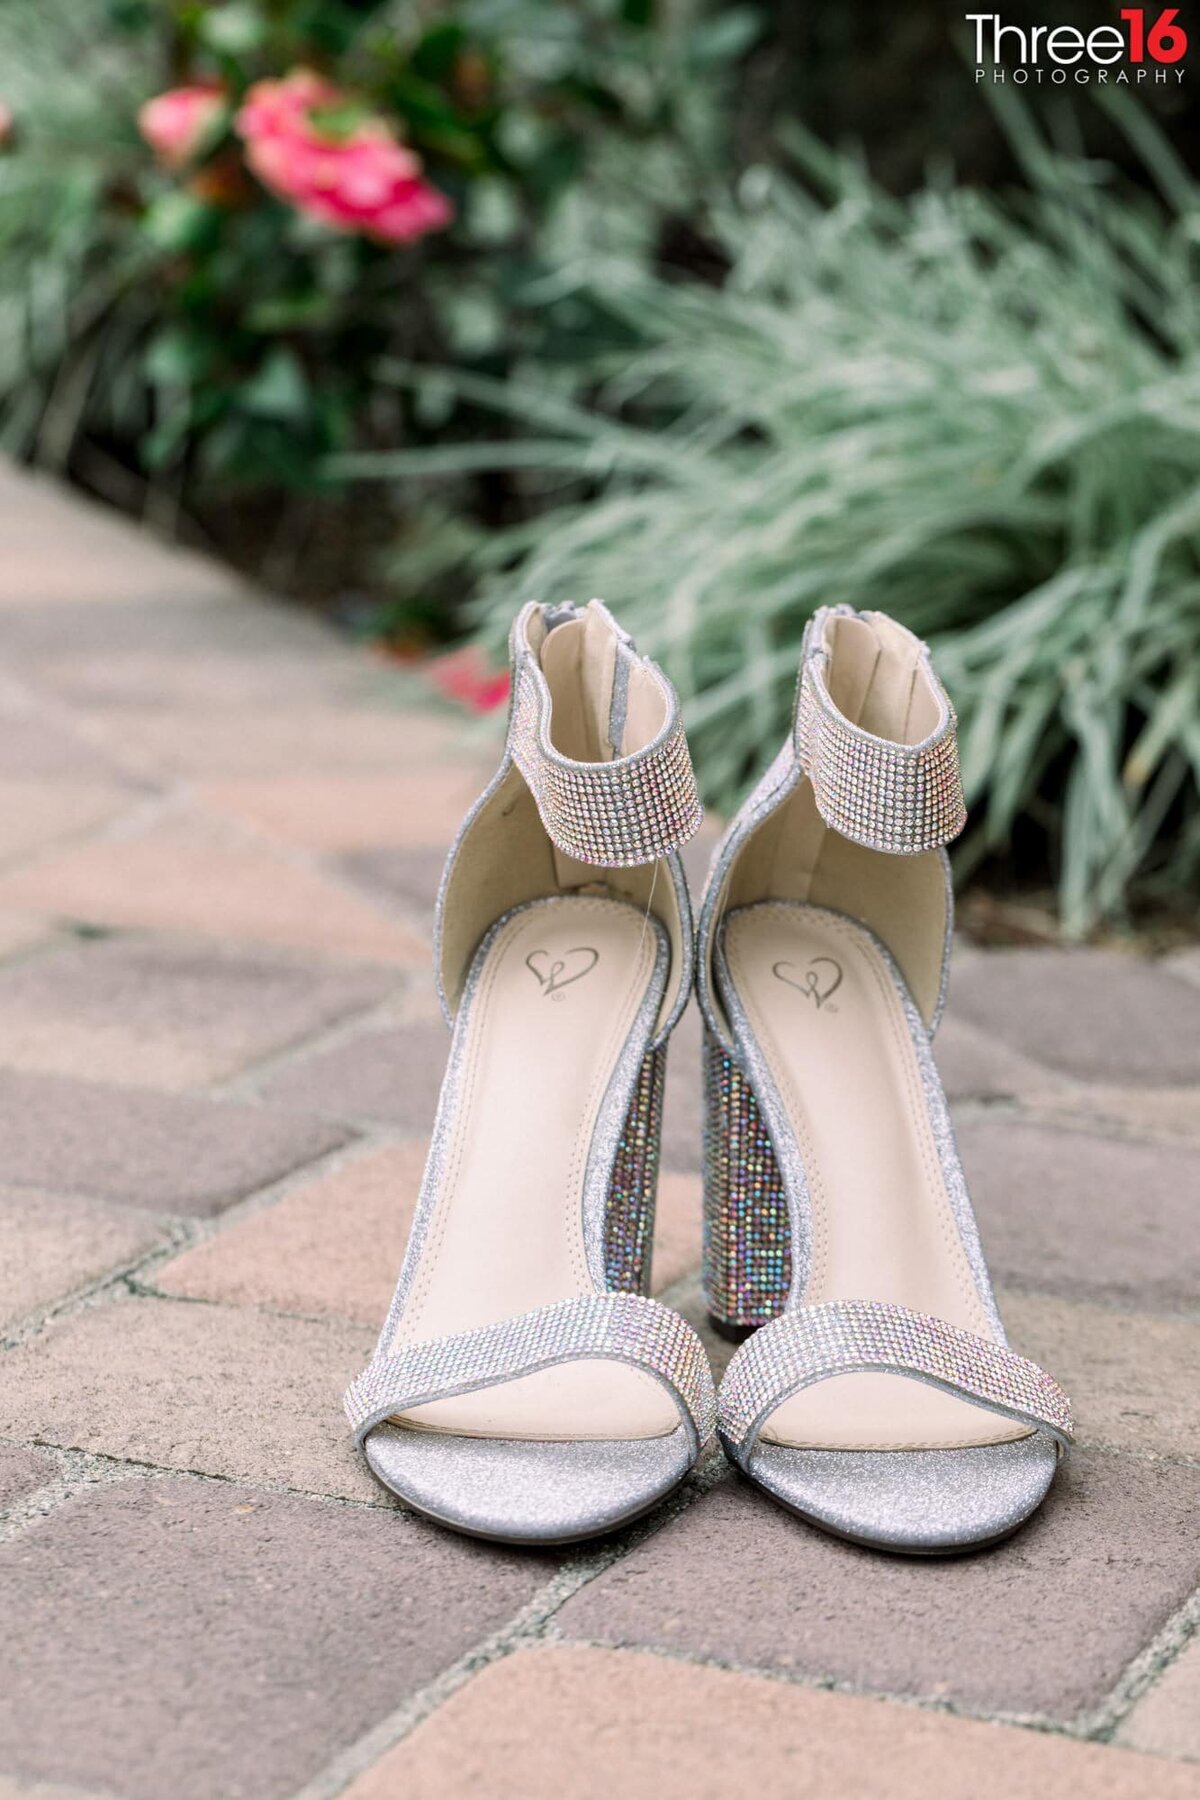 Bride's wedding day shoes